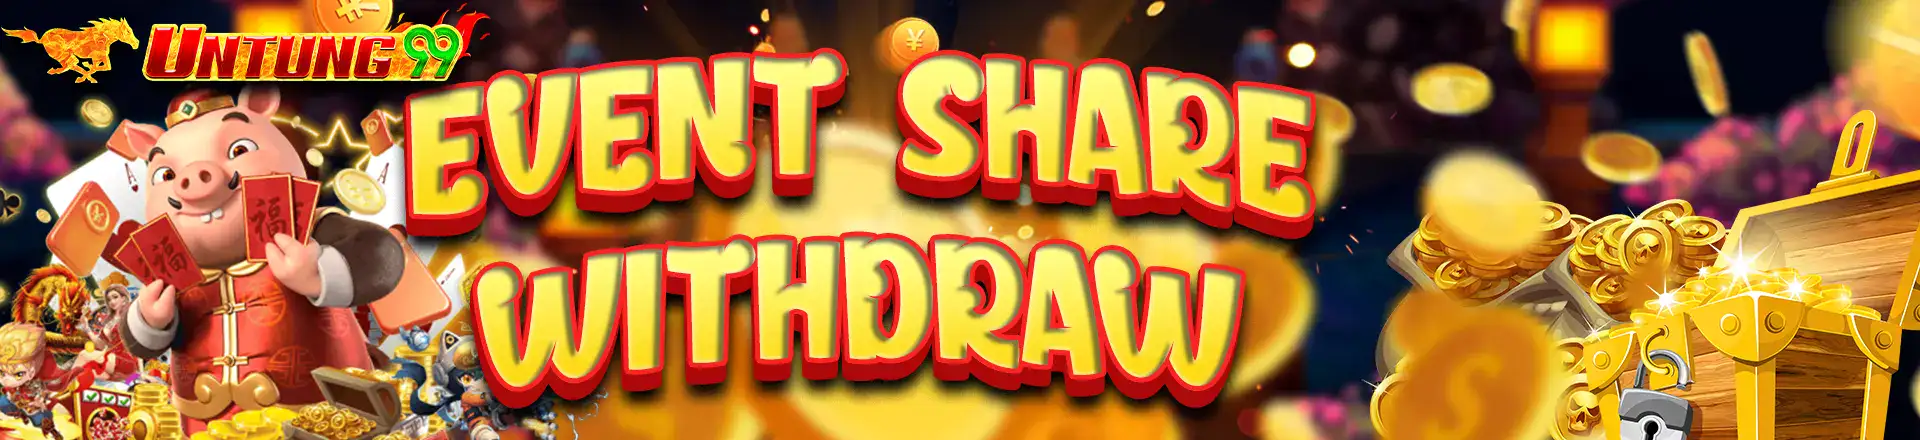 EVENT SHARE WITHDRAW UNTUNG99